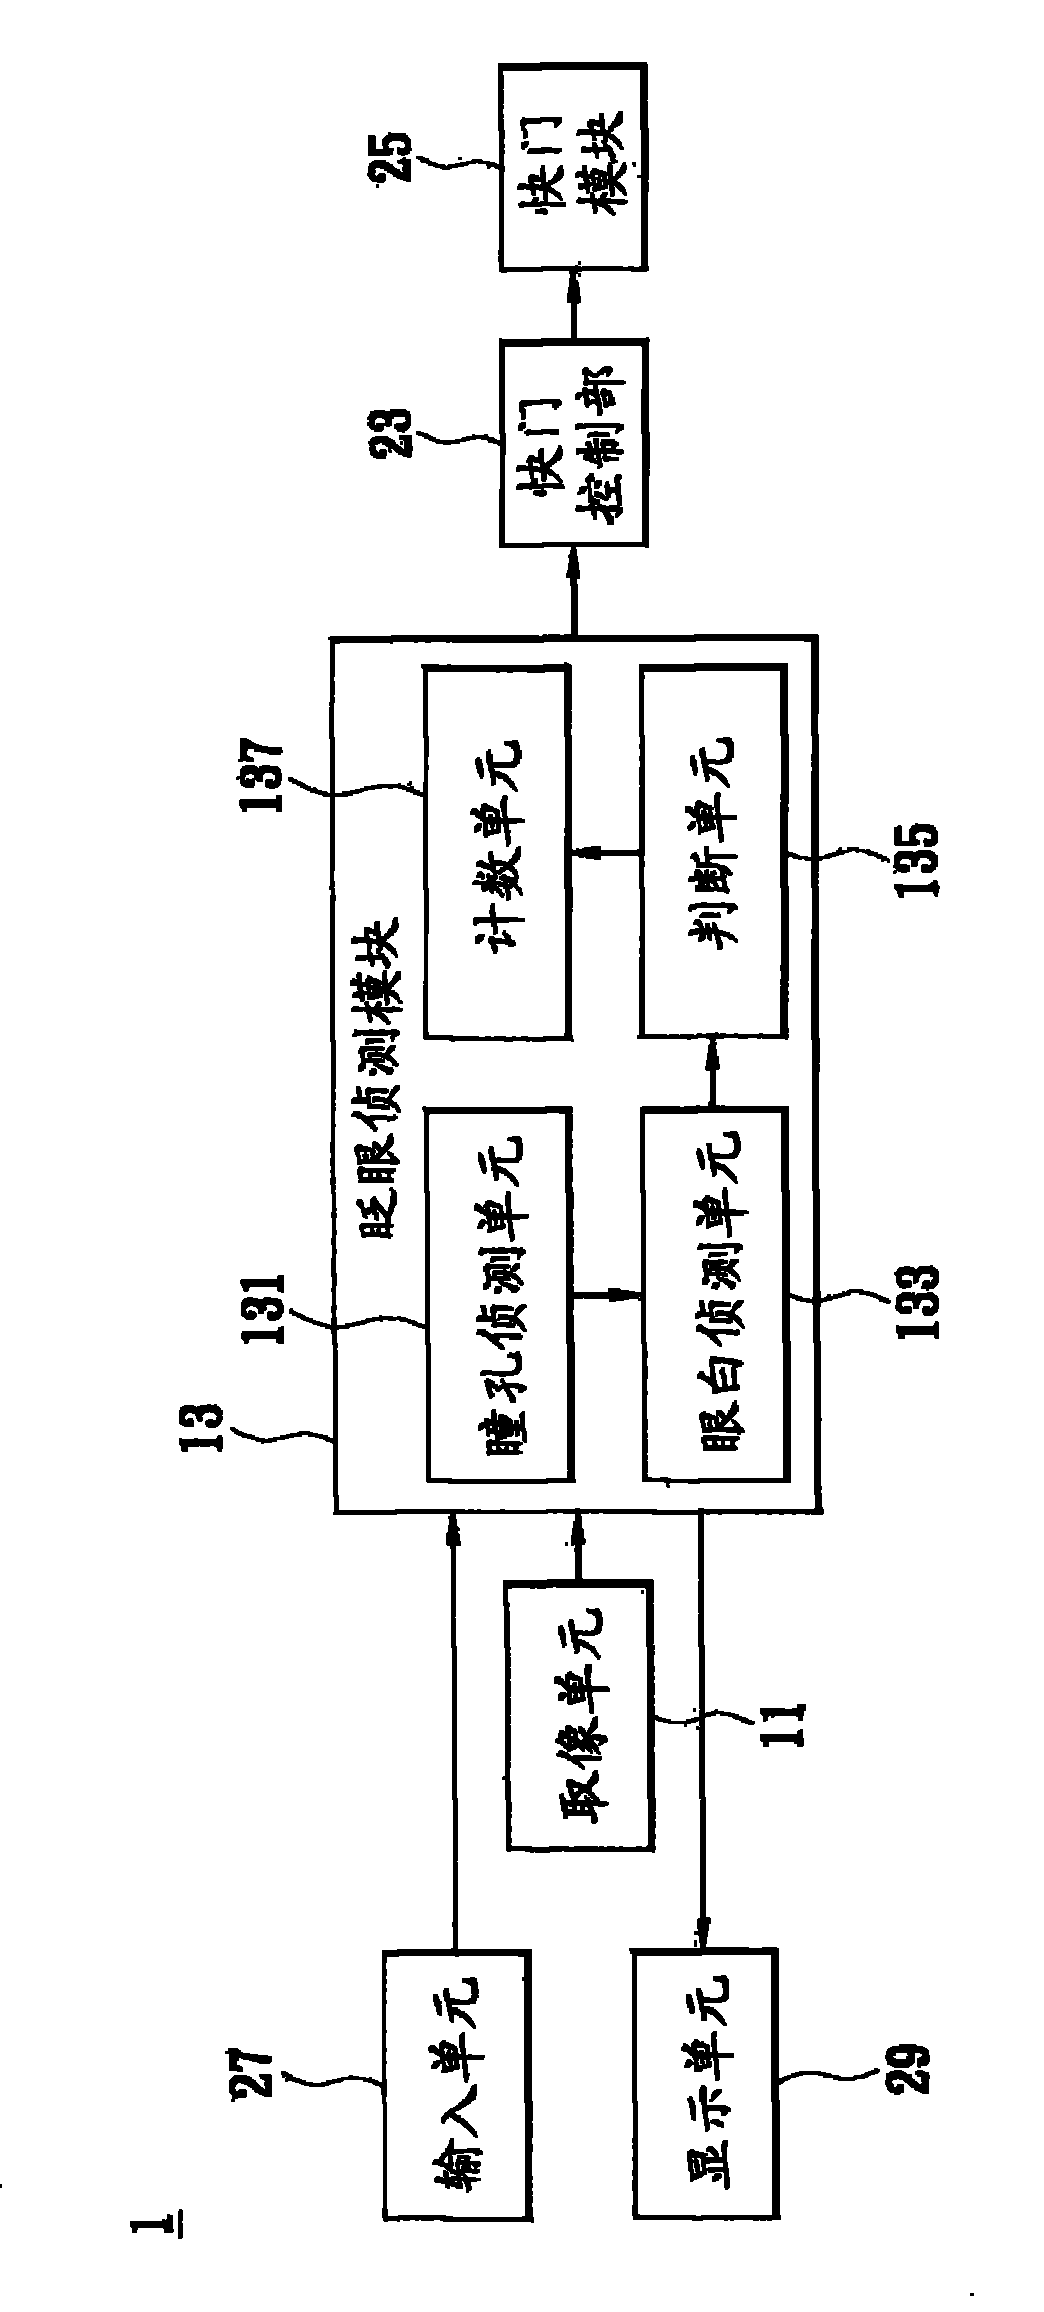 Anti-blink shooting system and method